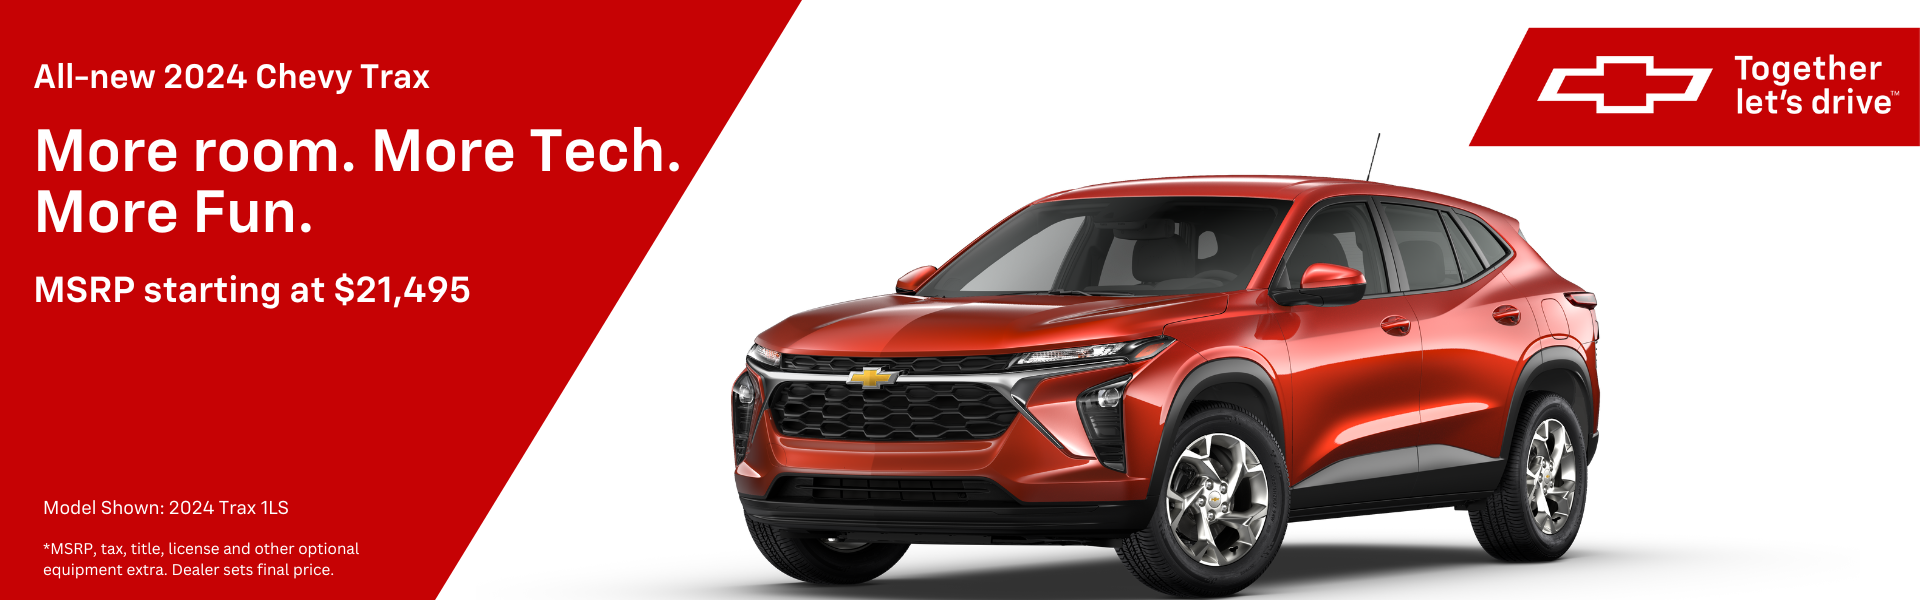 Ready to hit the road less traveled? The 2024 Chevrolet Trax